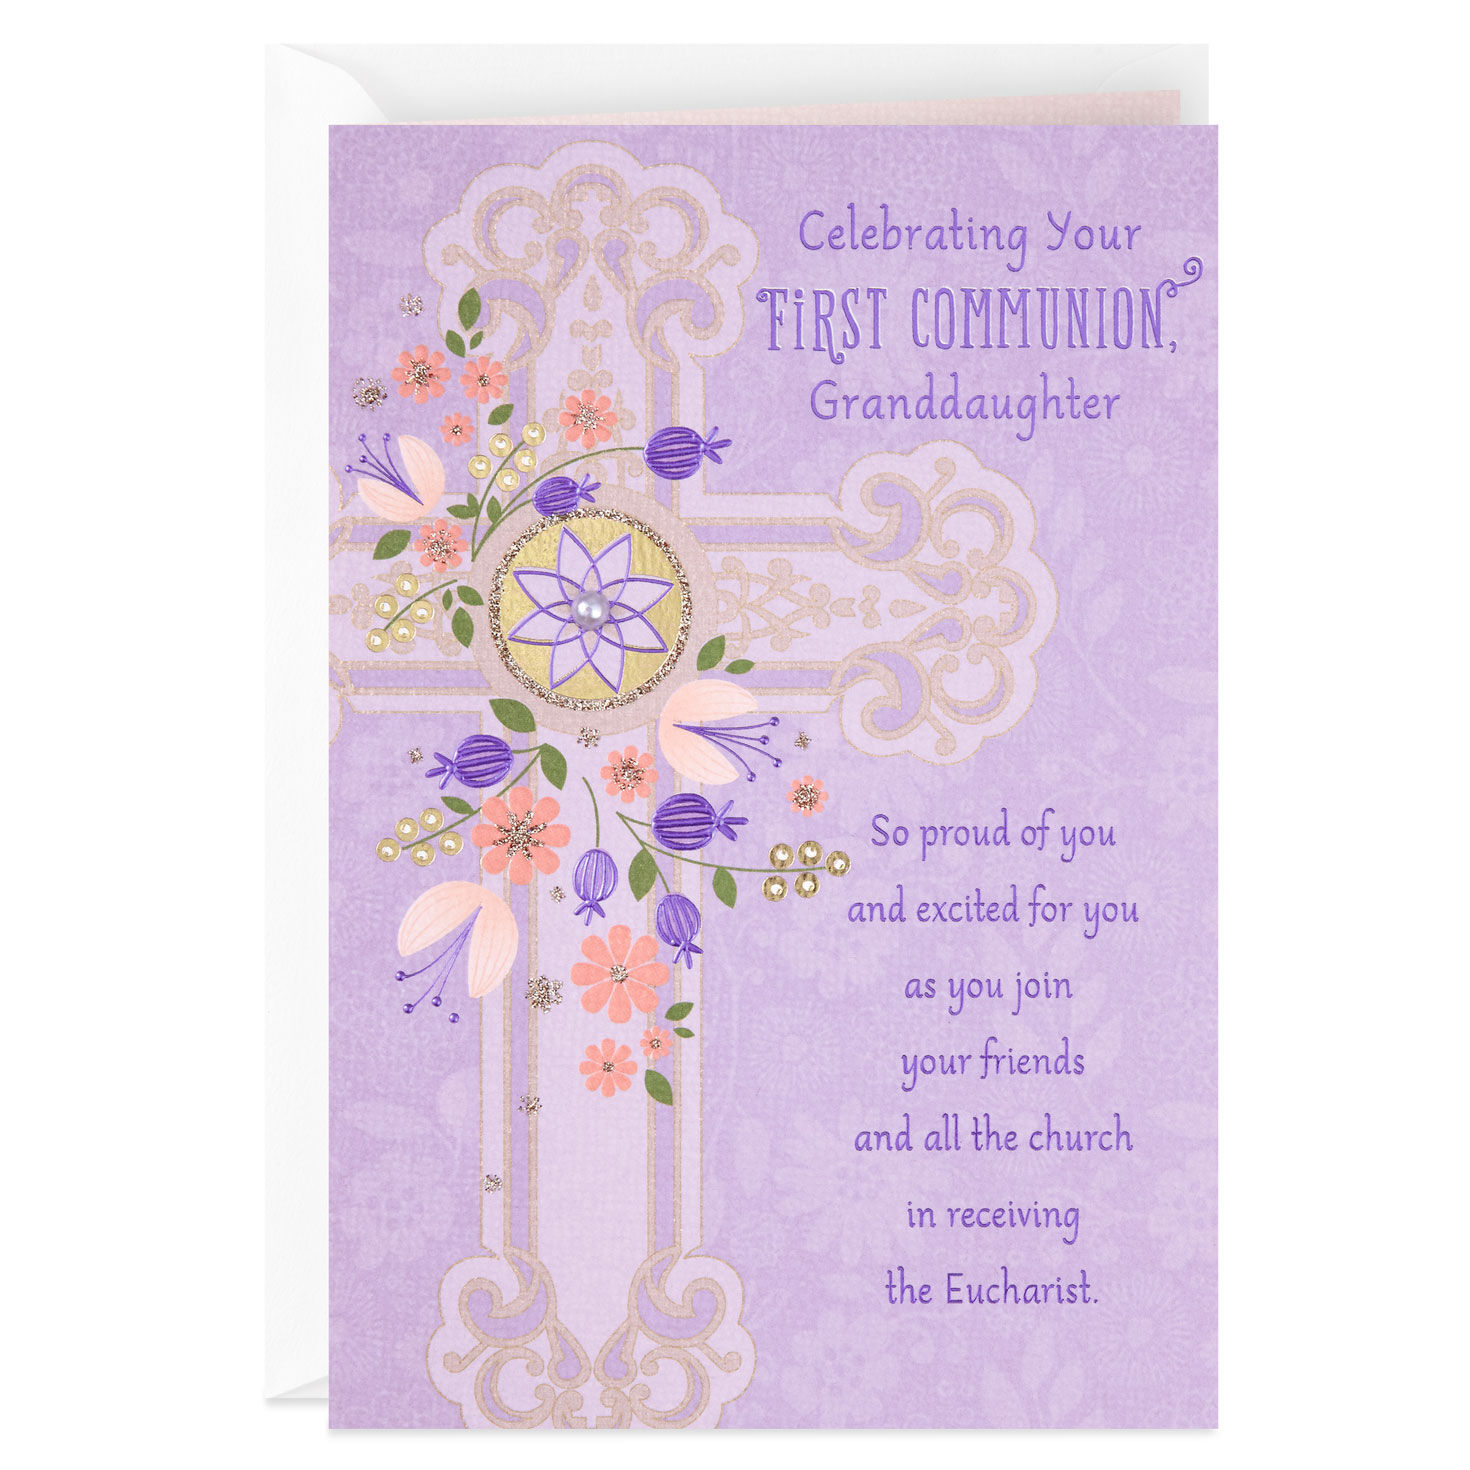 Granddaughter Communion Card With Love Granddaughter On Your First Holy Communion